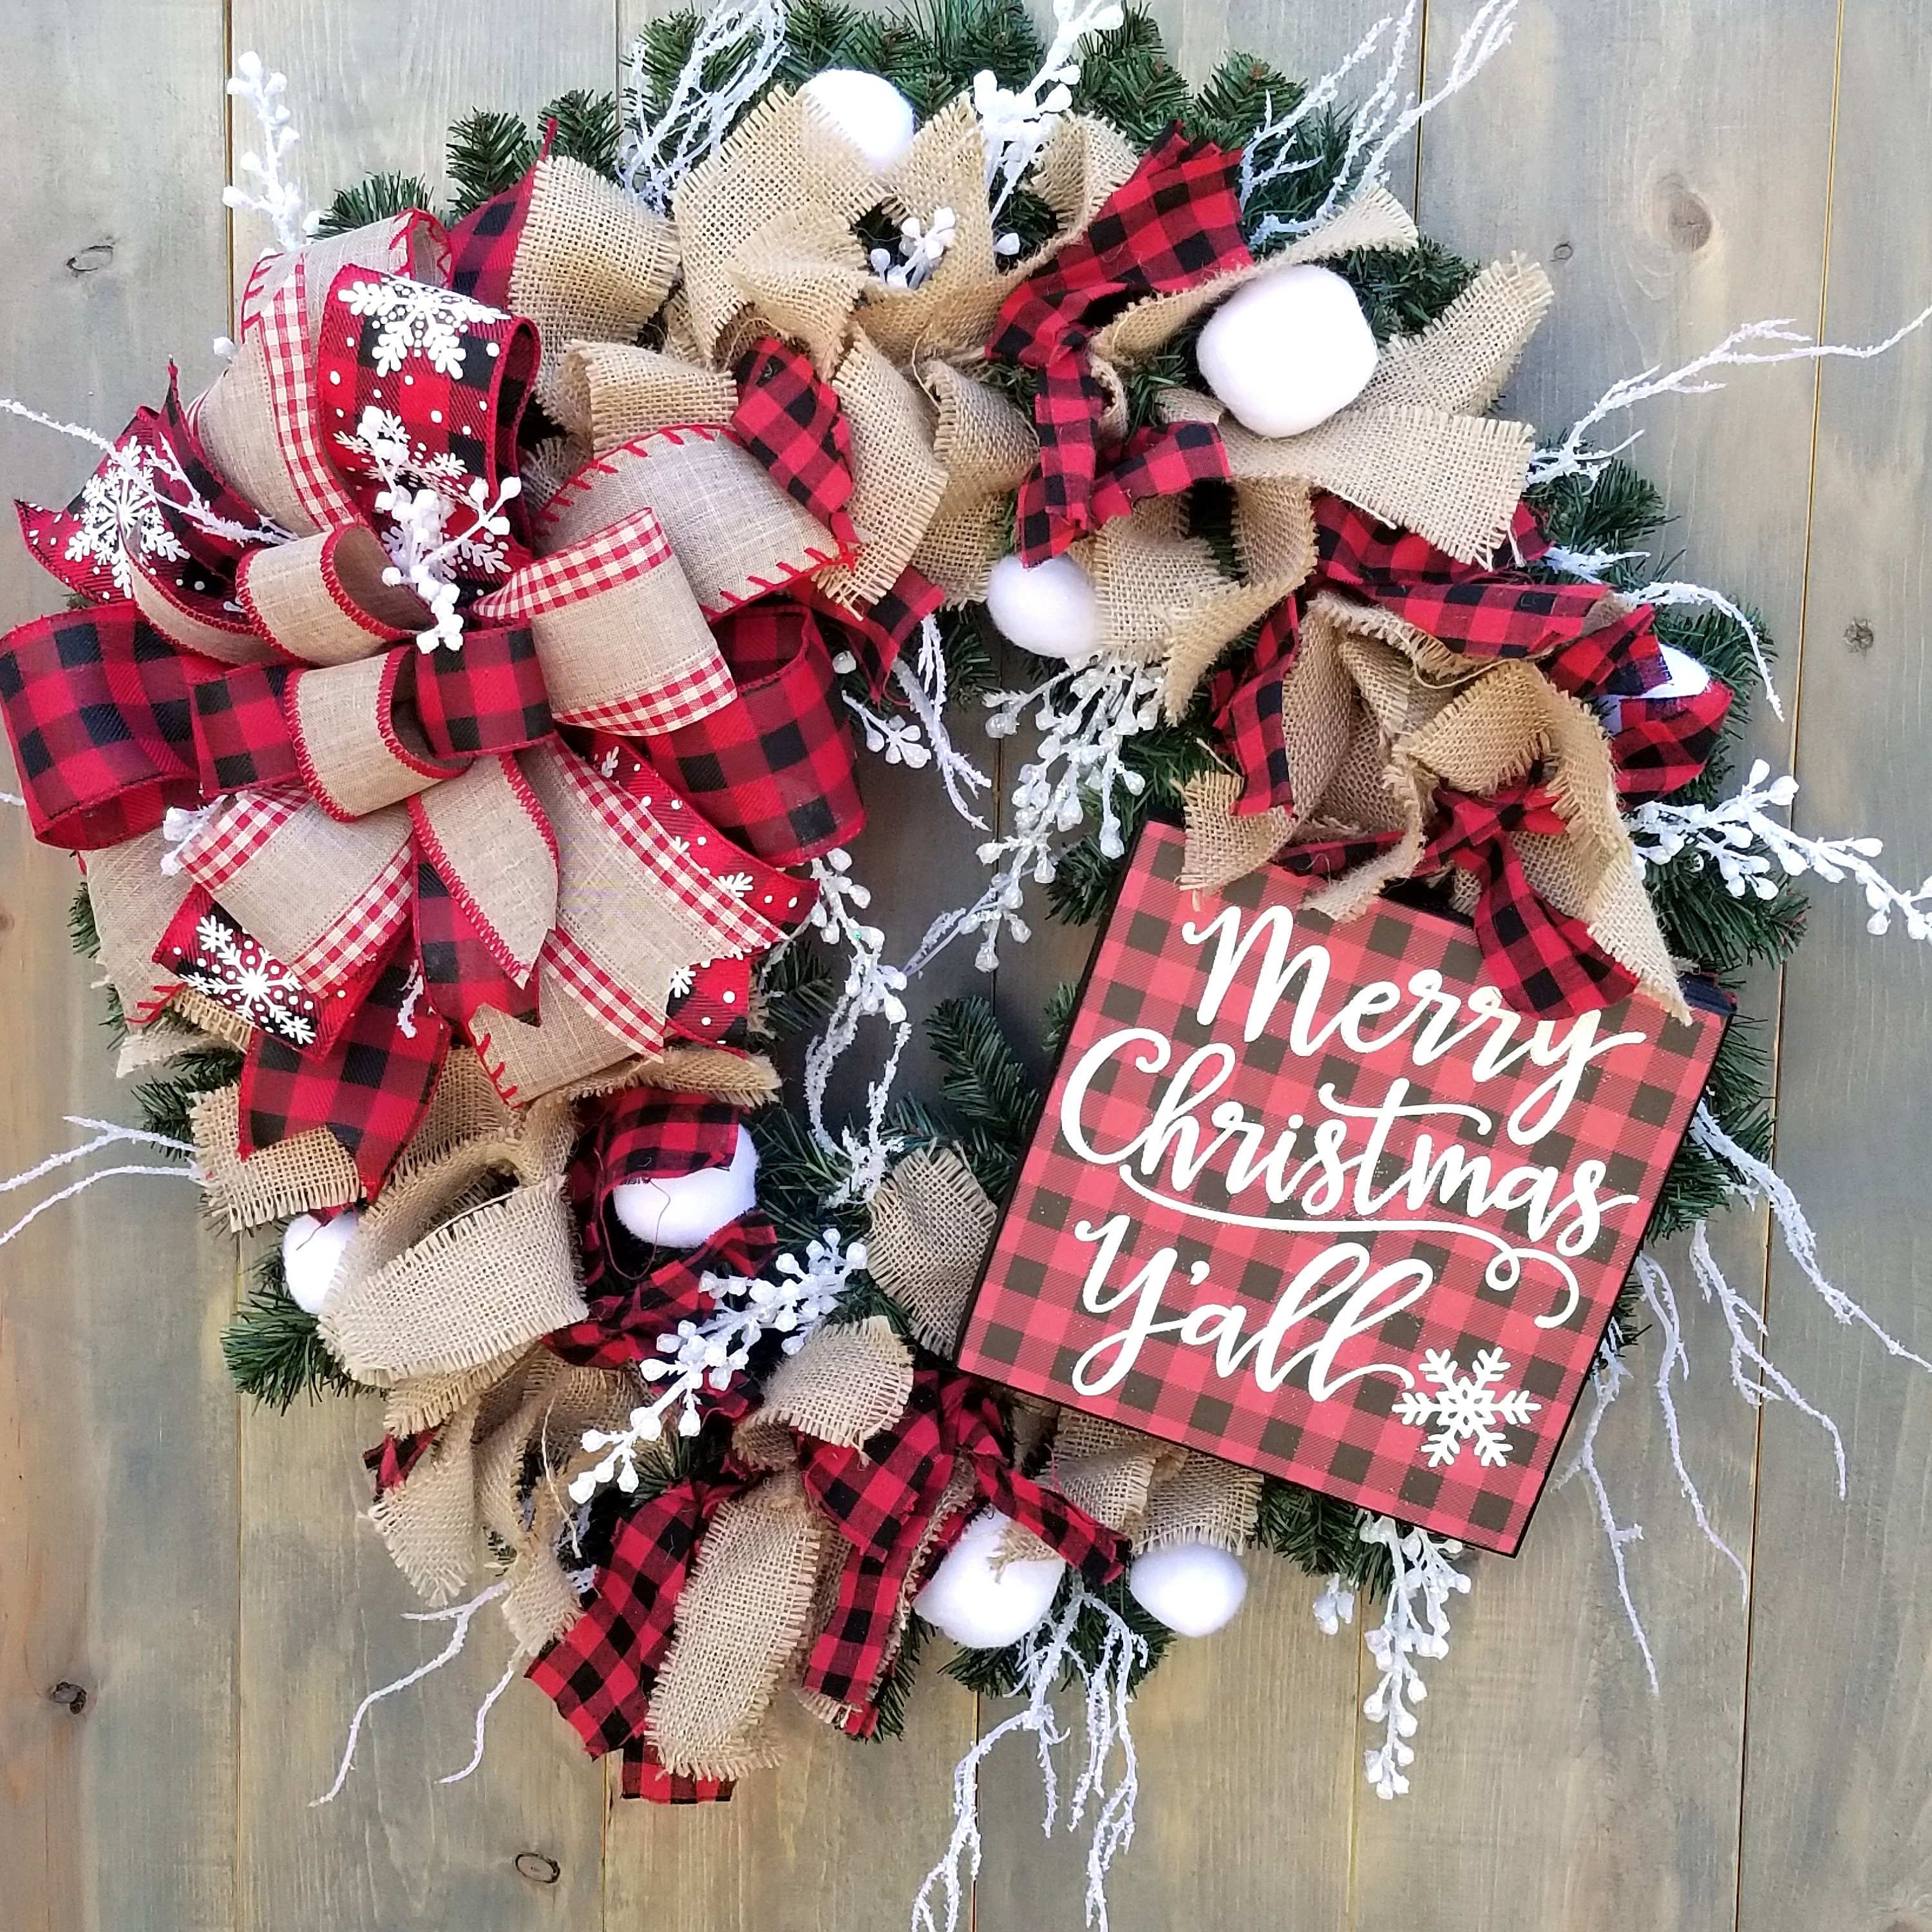 Rustic Burlap Garland With Red and White Checked Ribbon, Farmhouse